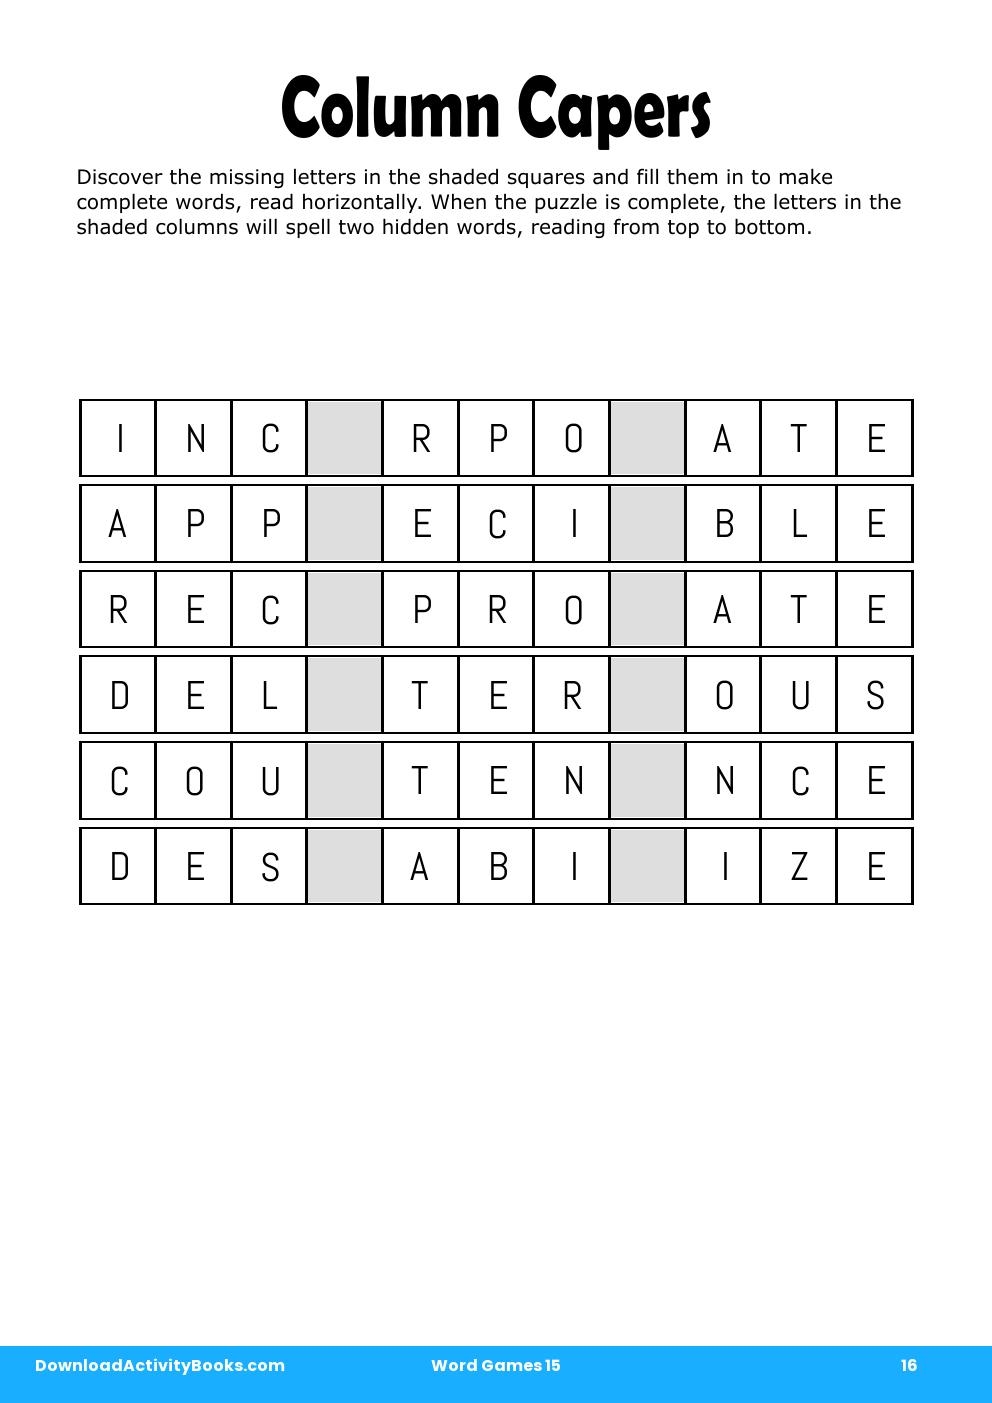 Column Capers in Word Games 15